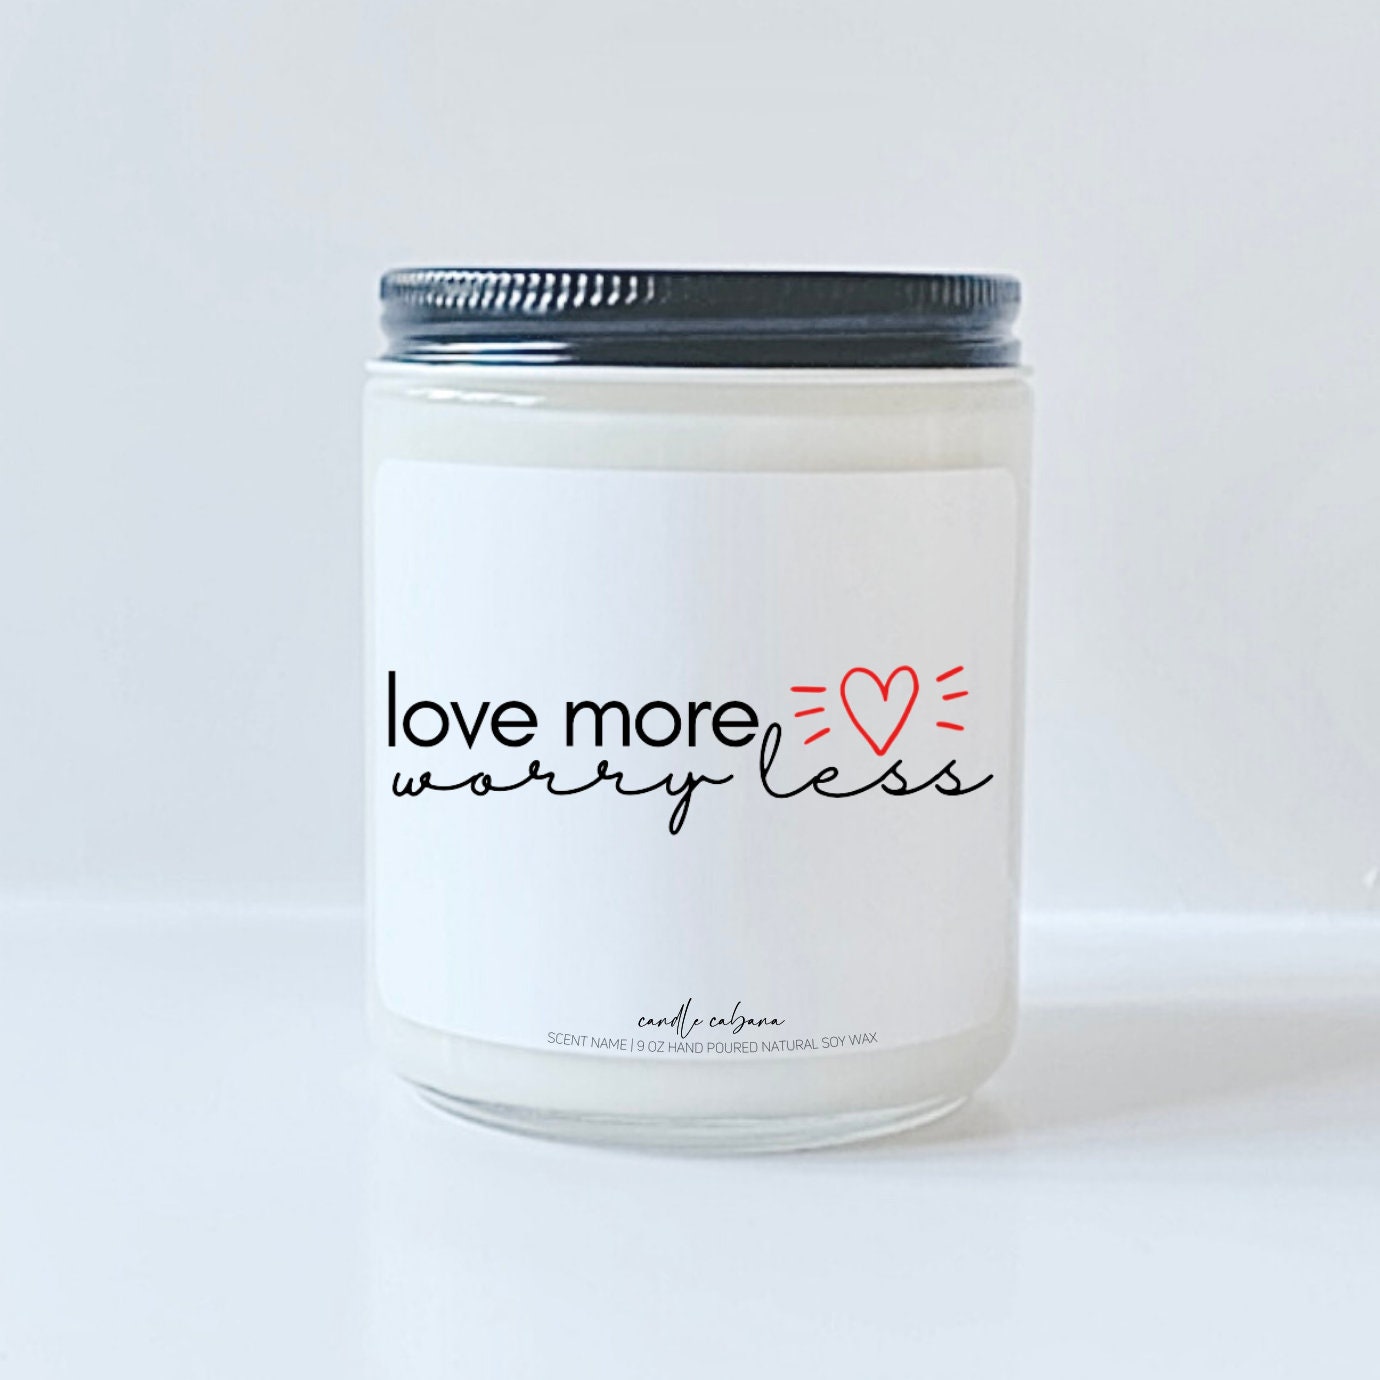 Love more, worry less inspirational quote decal